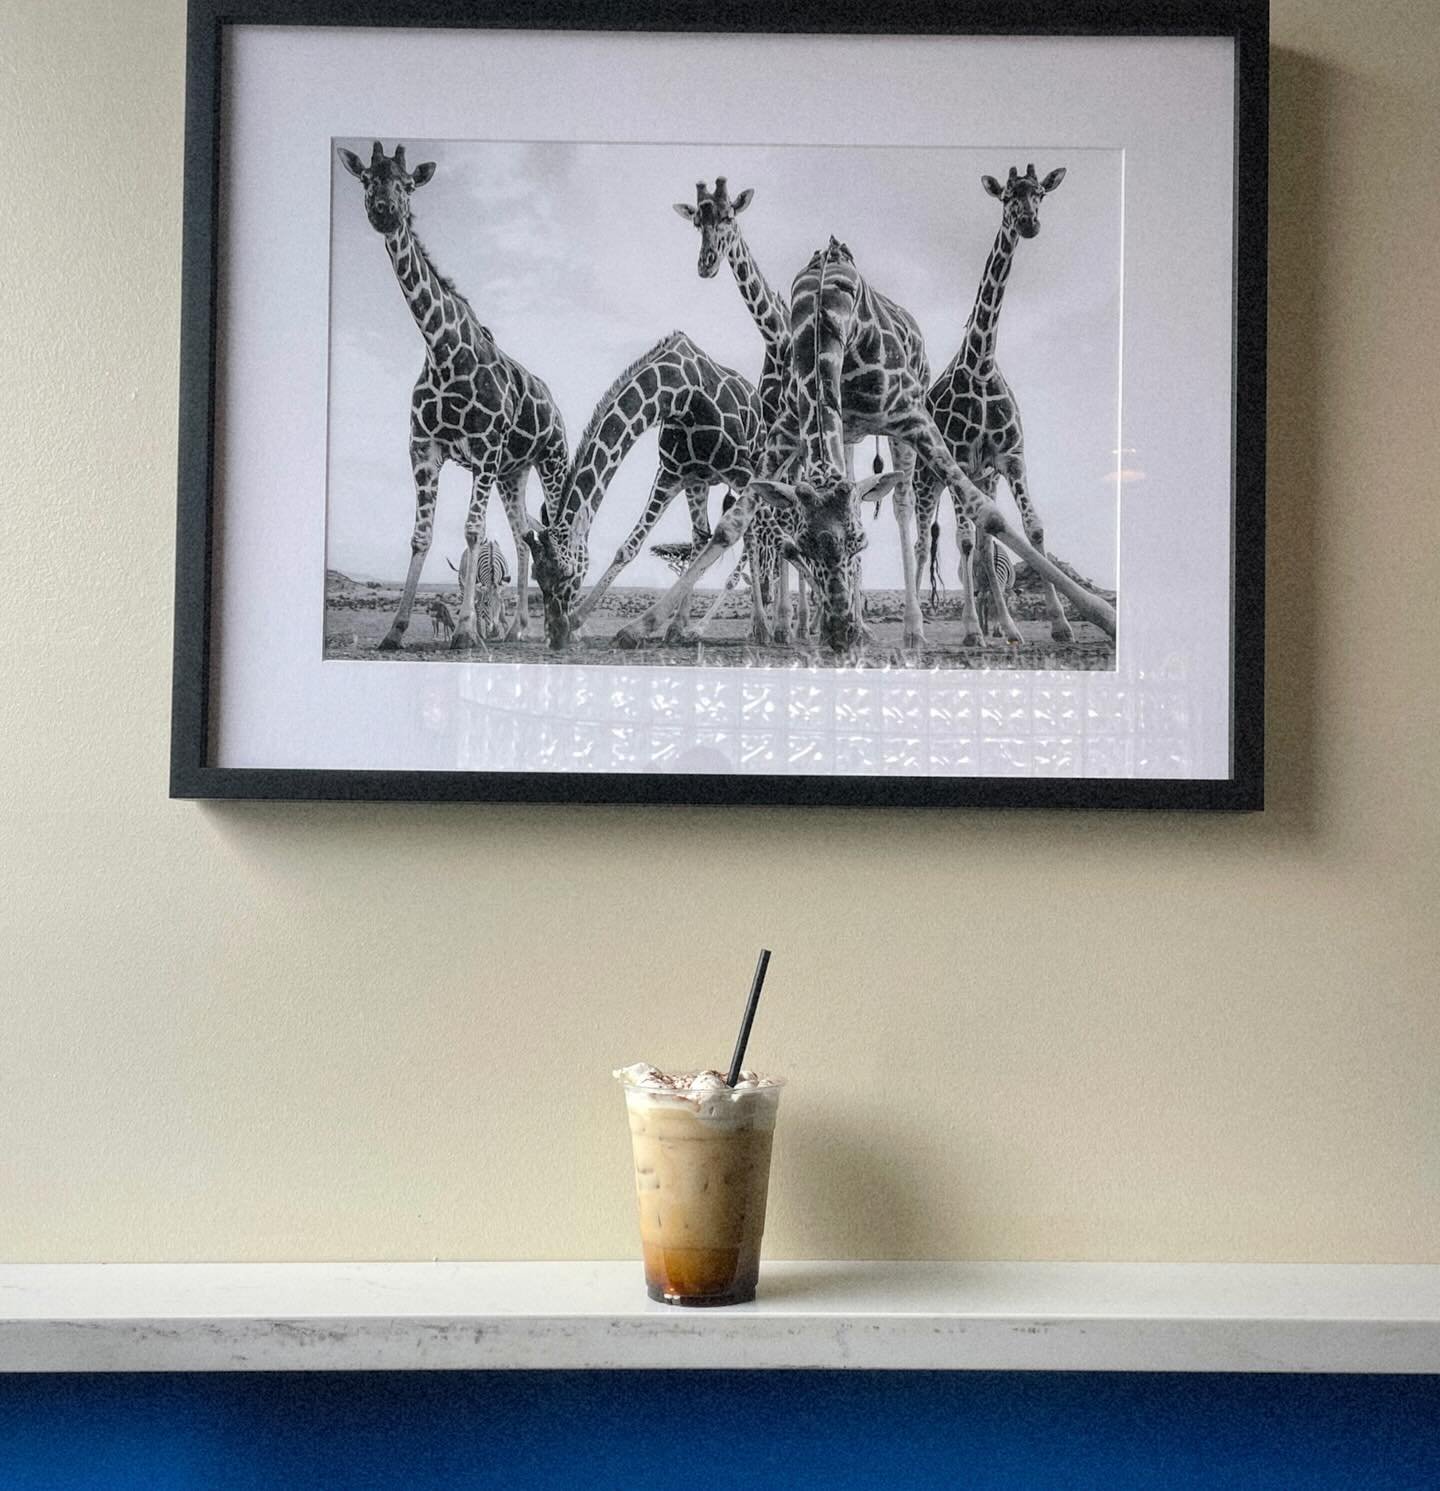 gonna need a longer straw 🦒